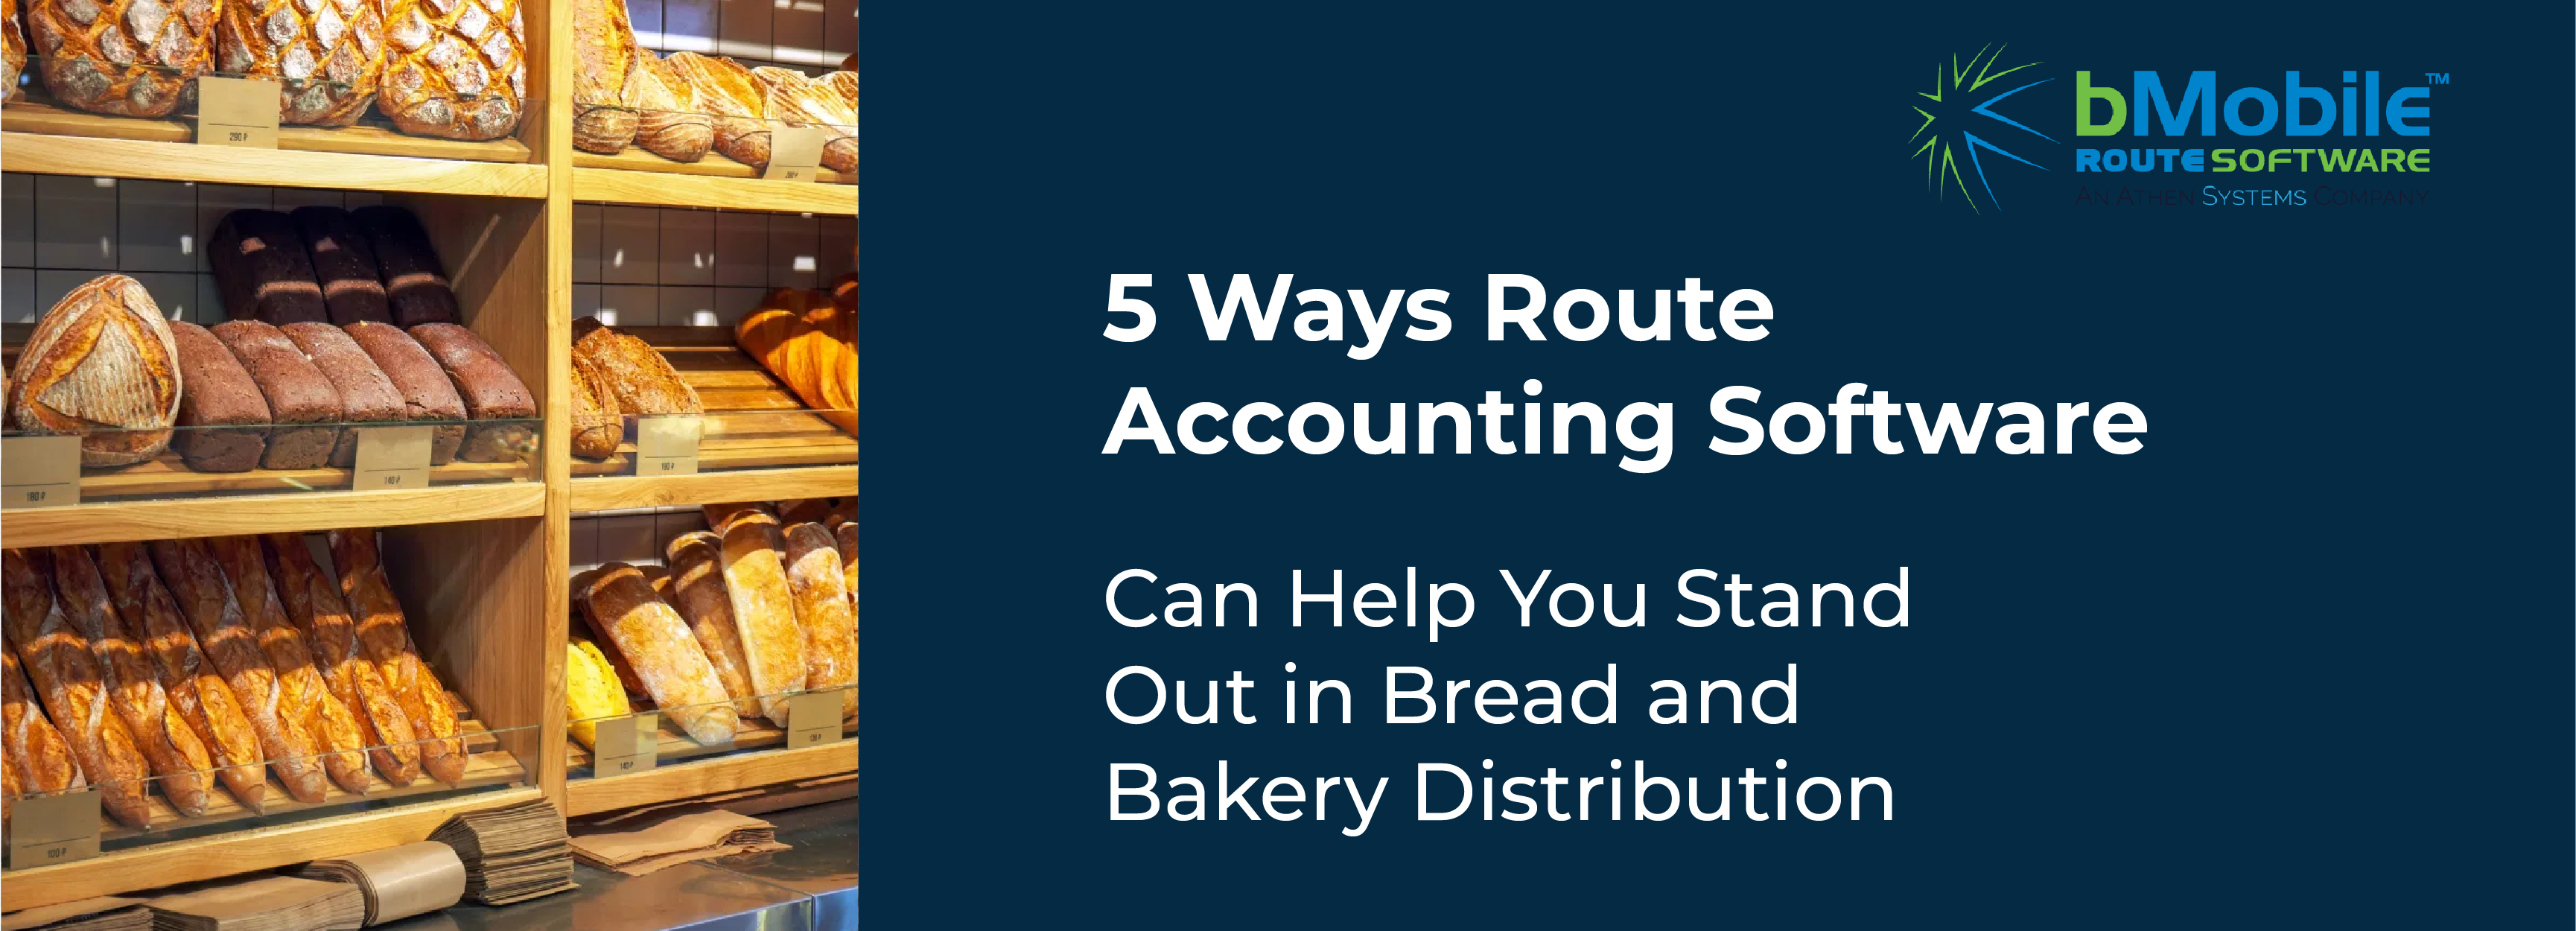 5 Ways Route Accounting Software Can Help You Stand Out in Bread and Bakery Distribution